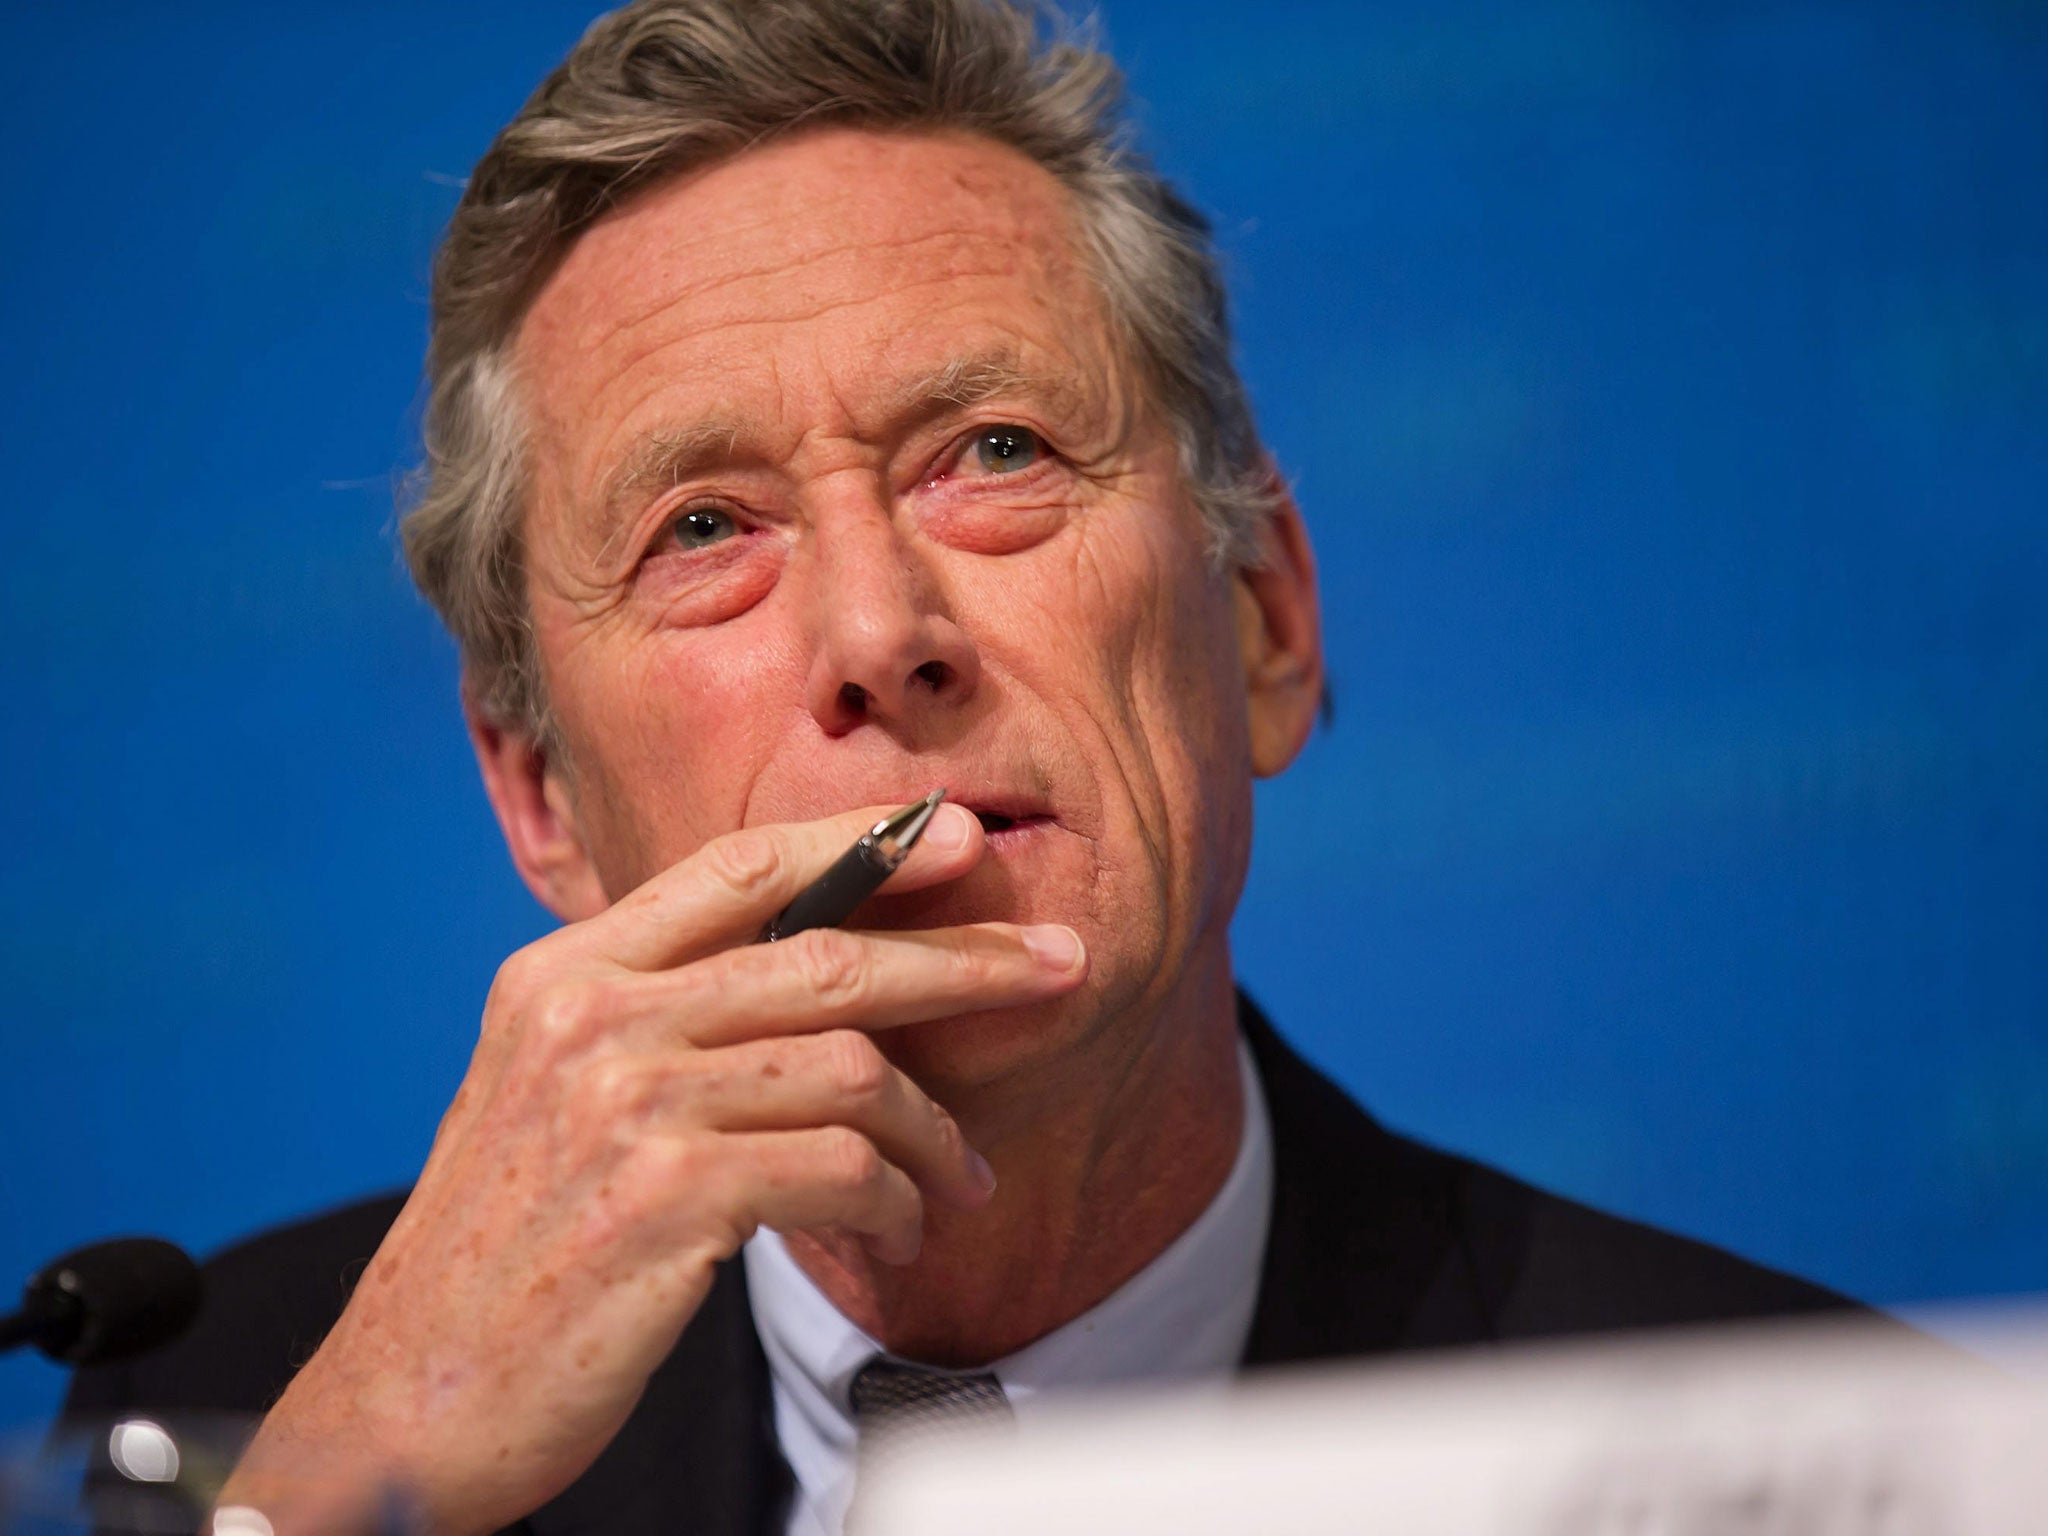 Olivier Blanchard: The IMF’s chief economist said slower fiscal consolidation might be better